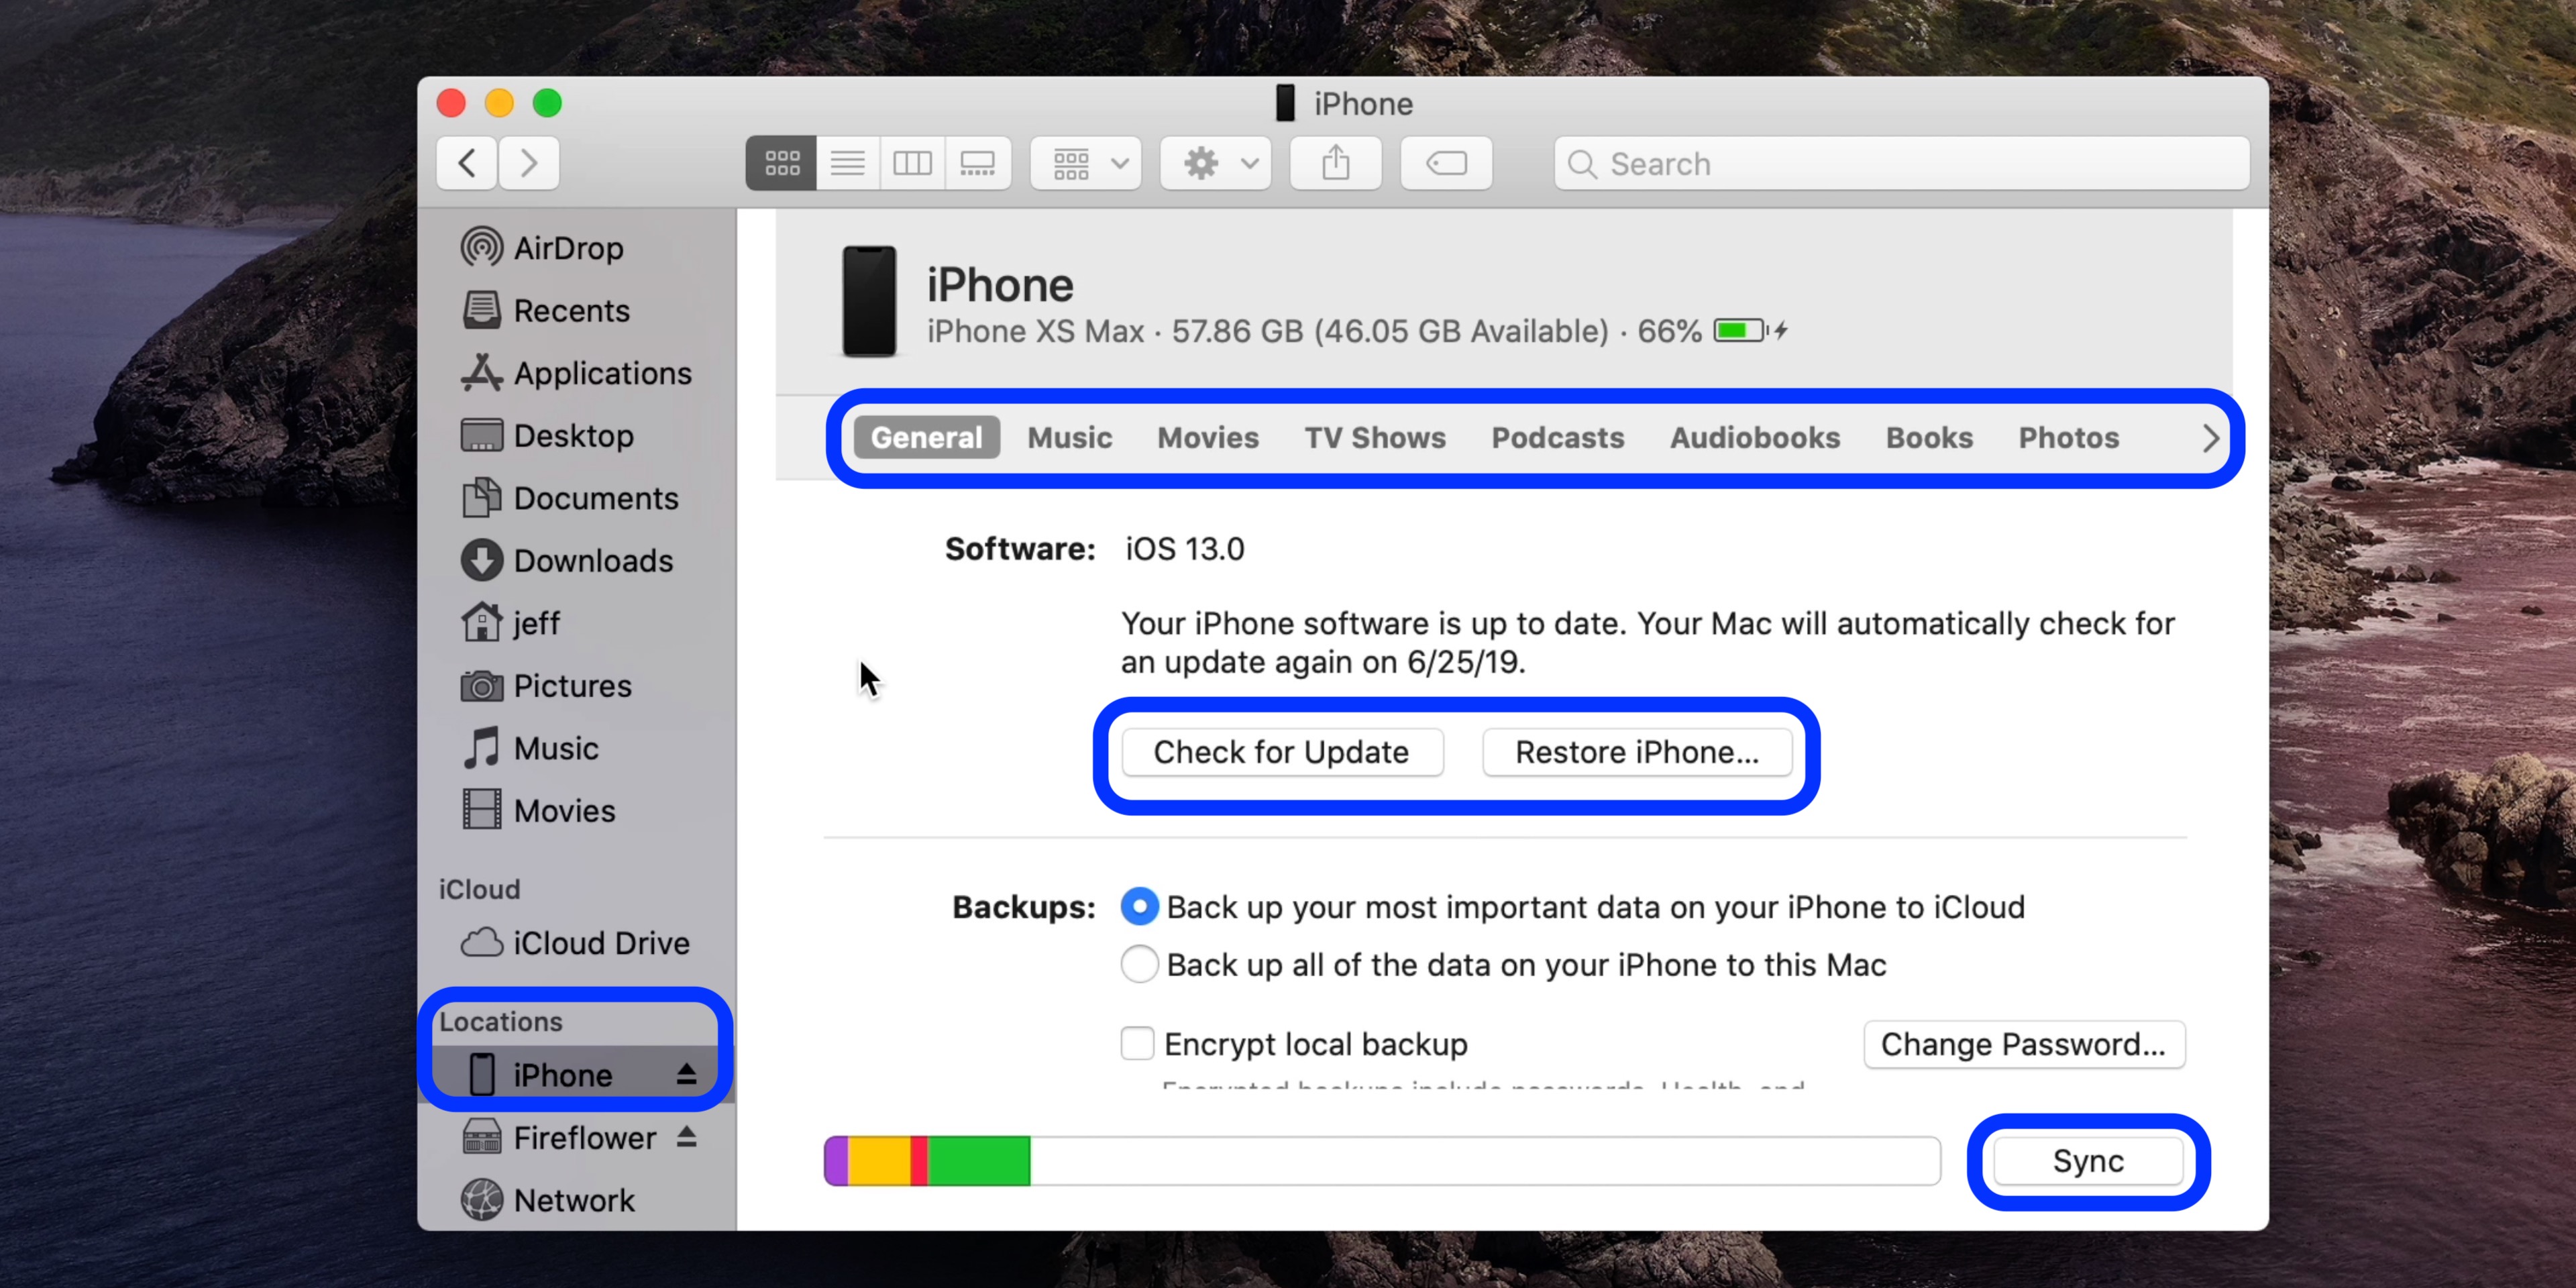 where can you find the setting to synchronize your email contacts with contacts app? for mac